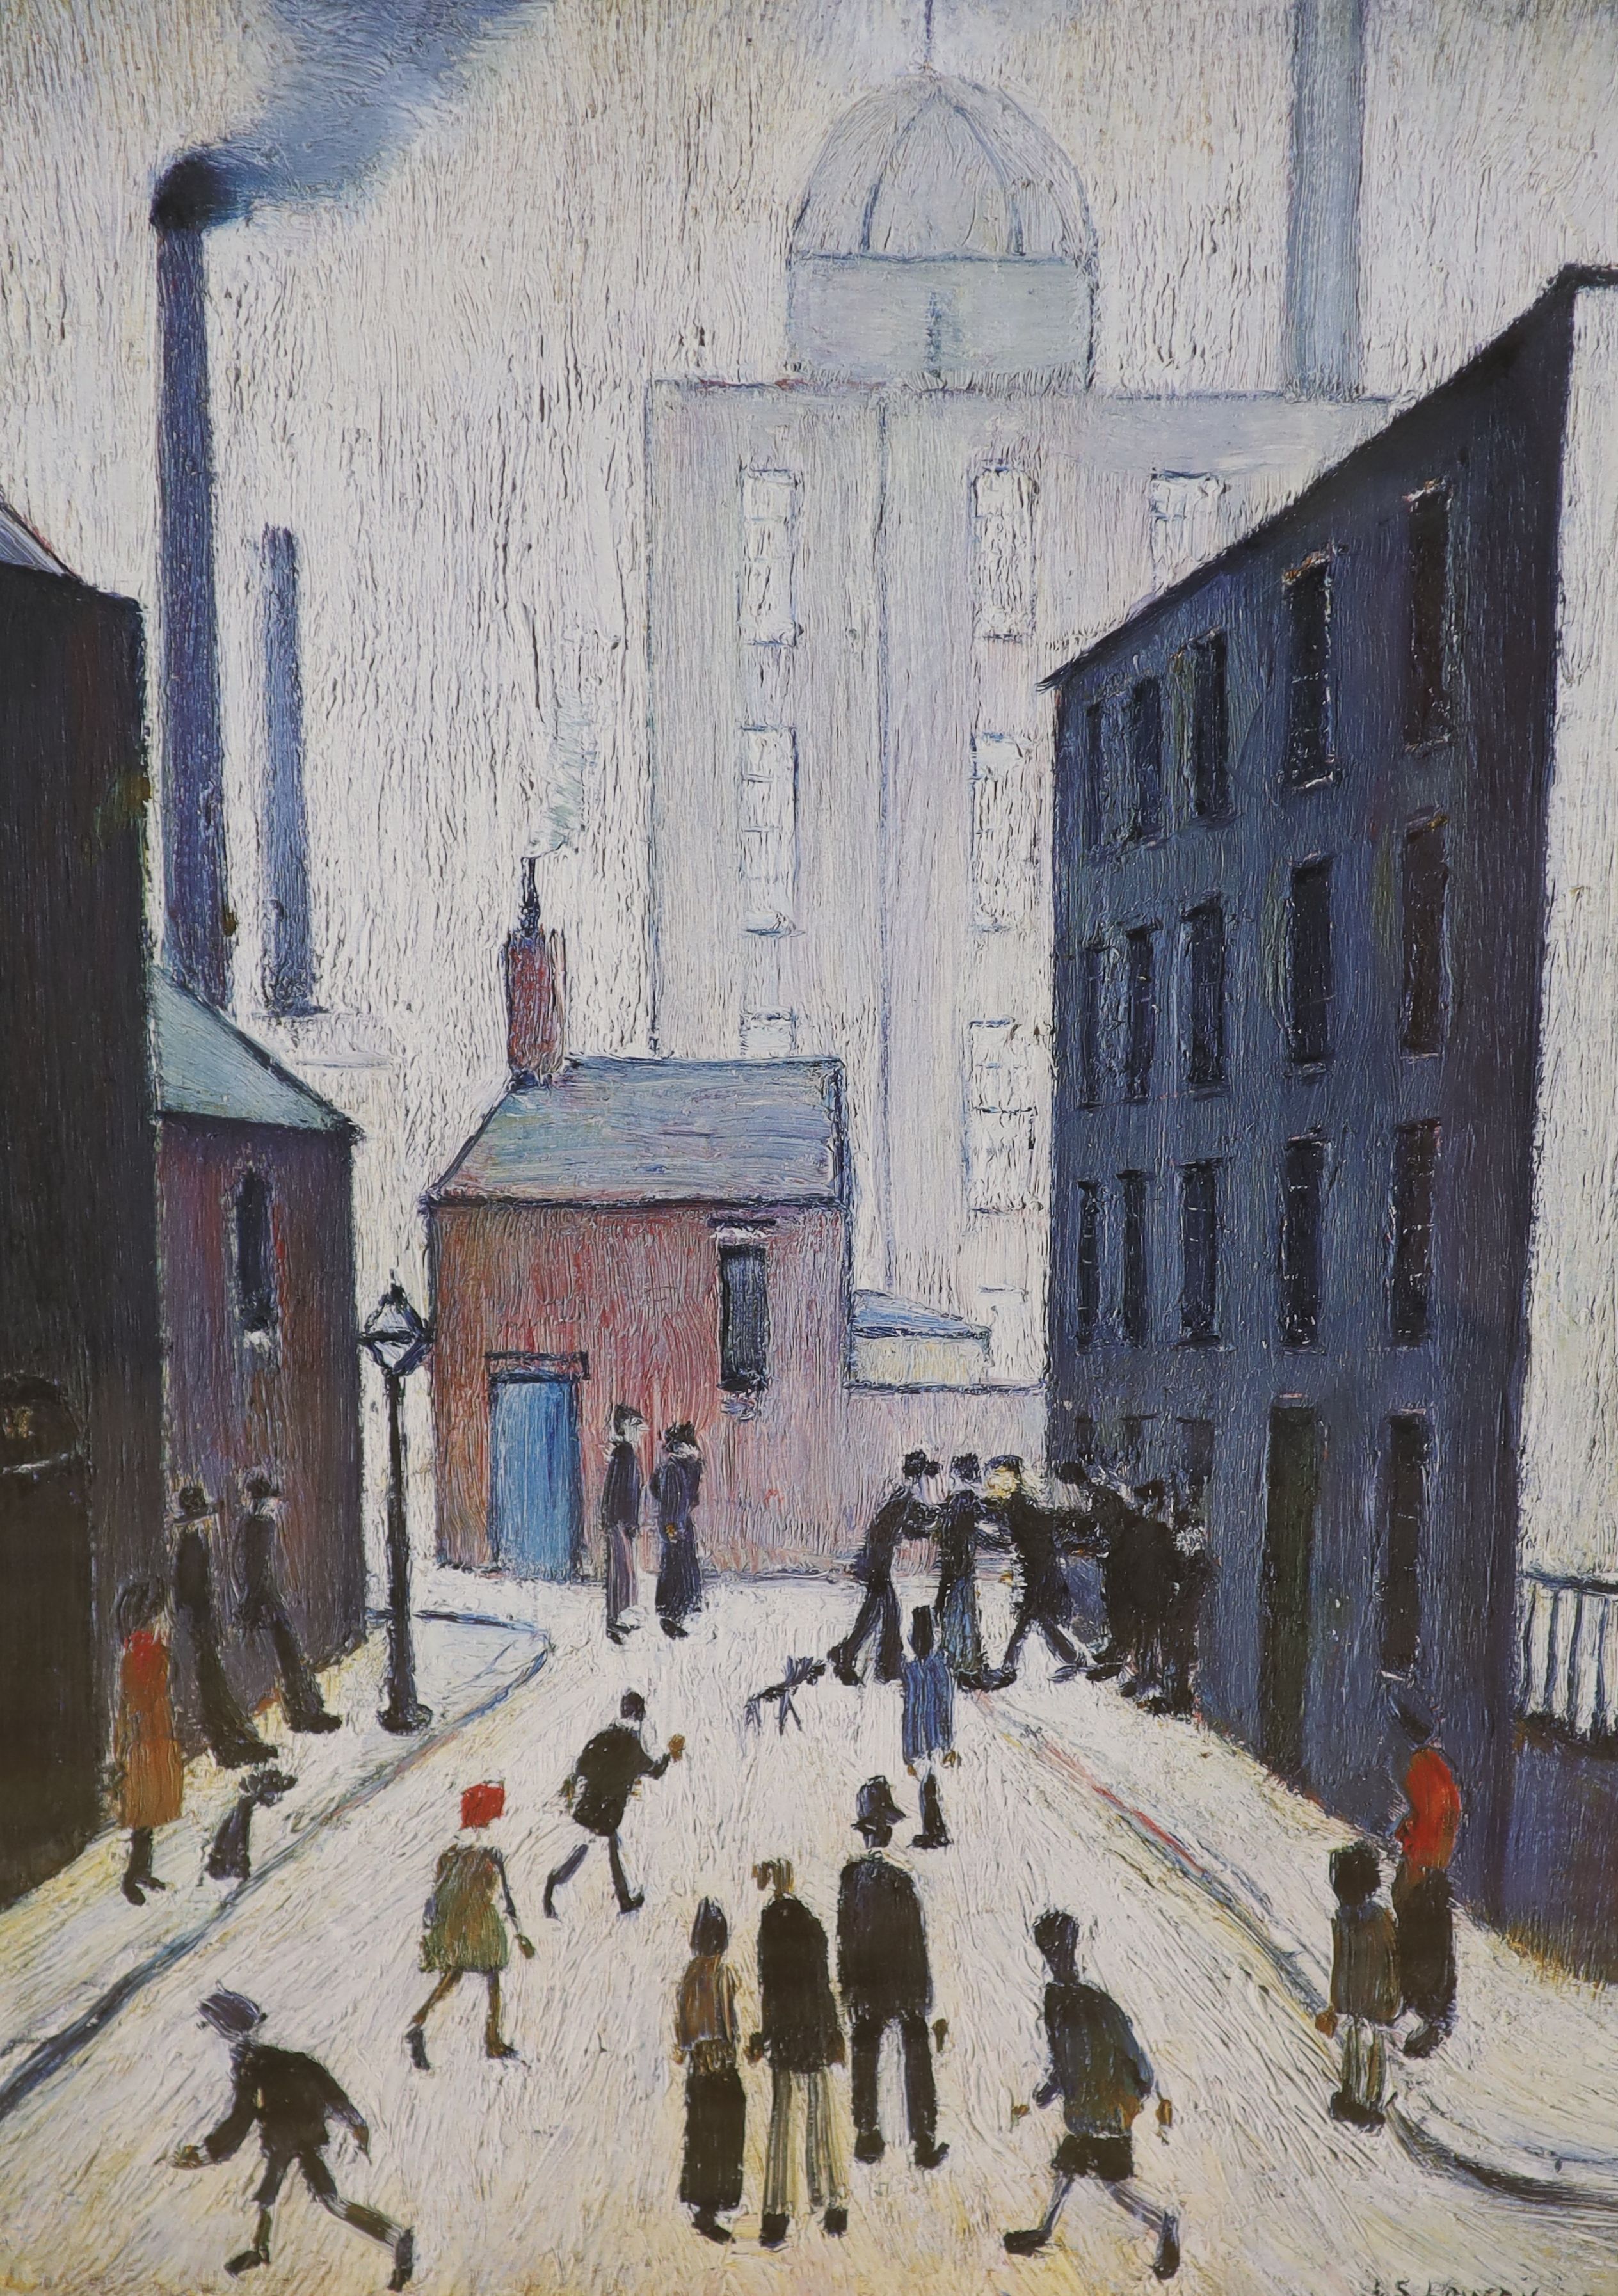 Lawrence Stephen Lowry, limited edition gouttelette, 'Industrial scene', one of 75 with COA from Charles Philips, 71 x 50cm